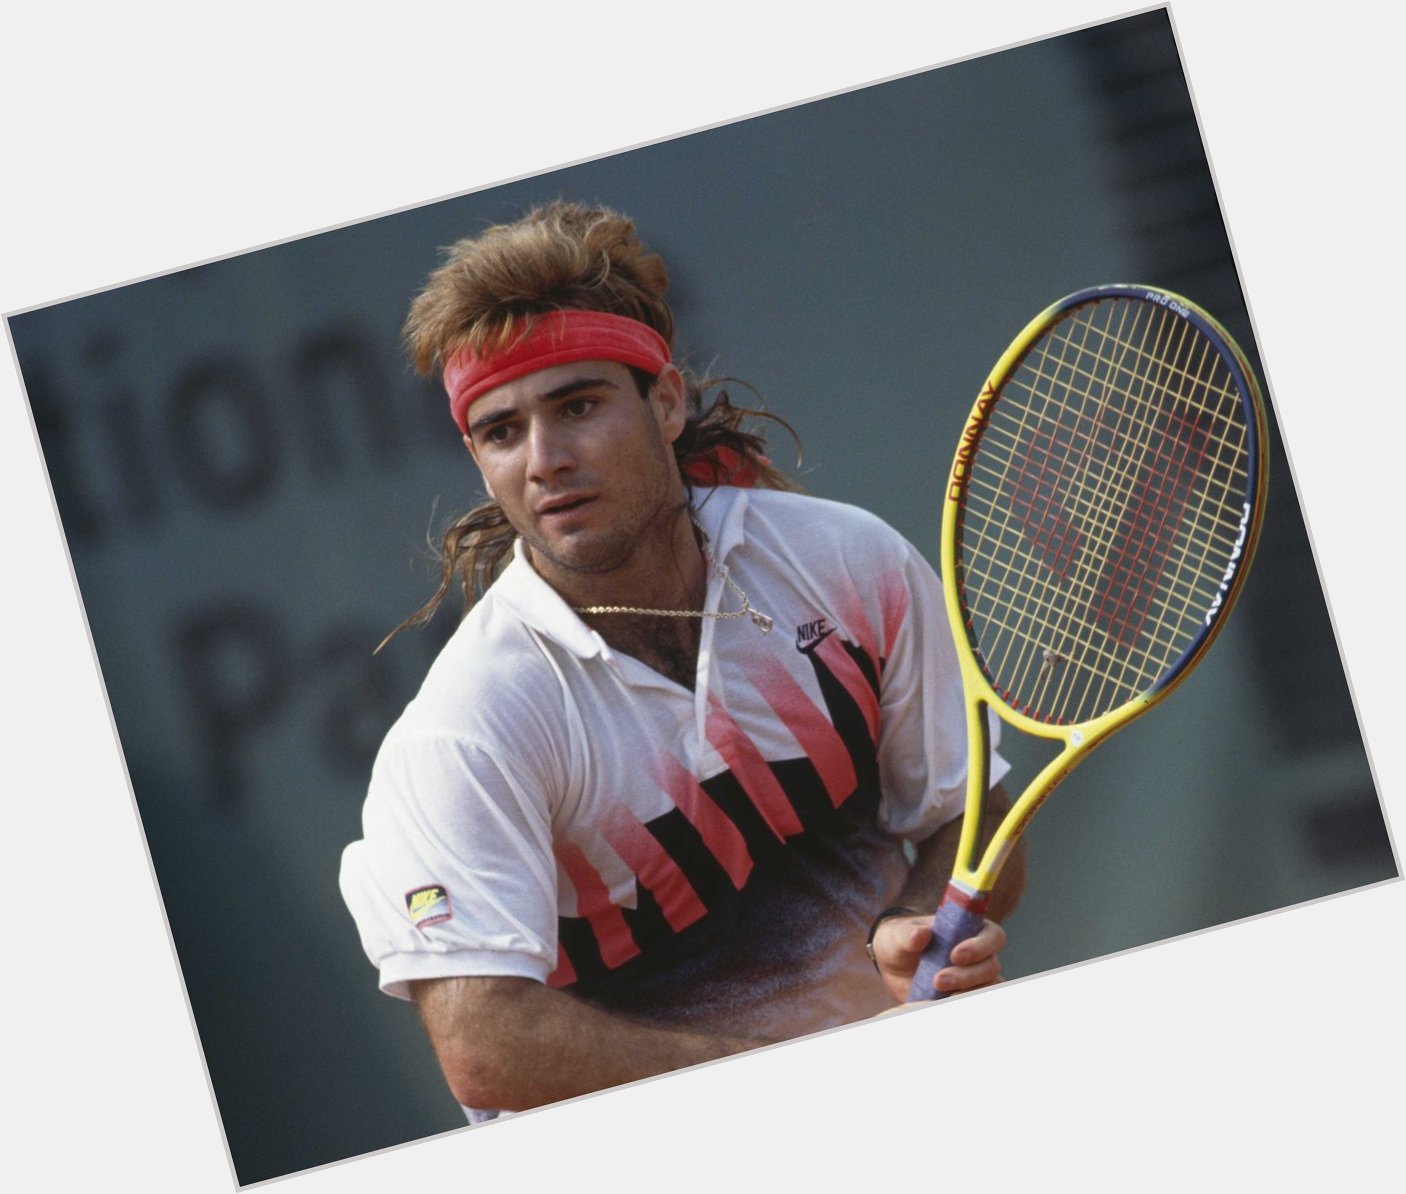 Happy 45th birthday to tennis legend Andre Agassi! 